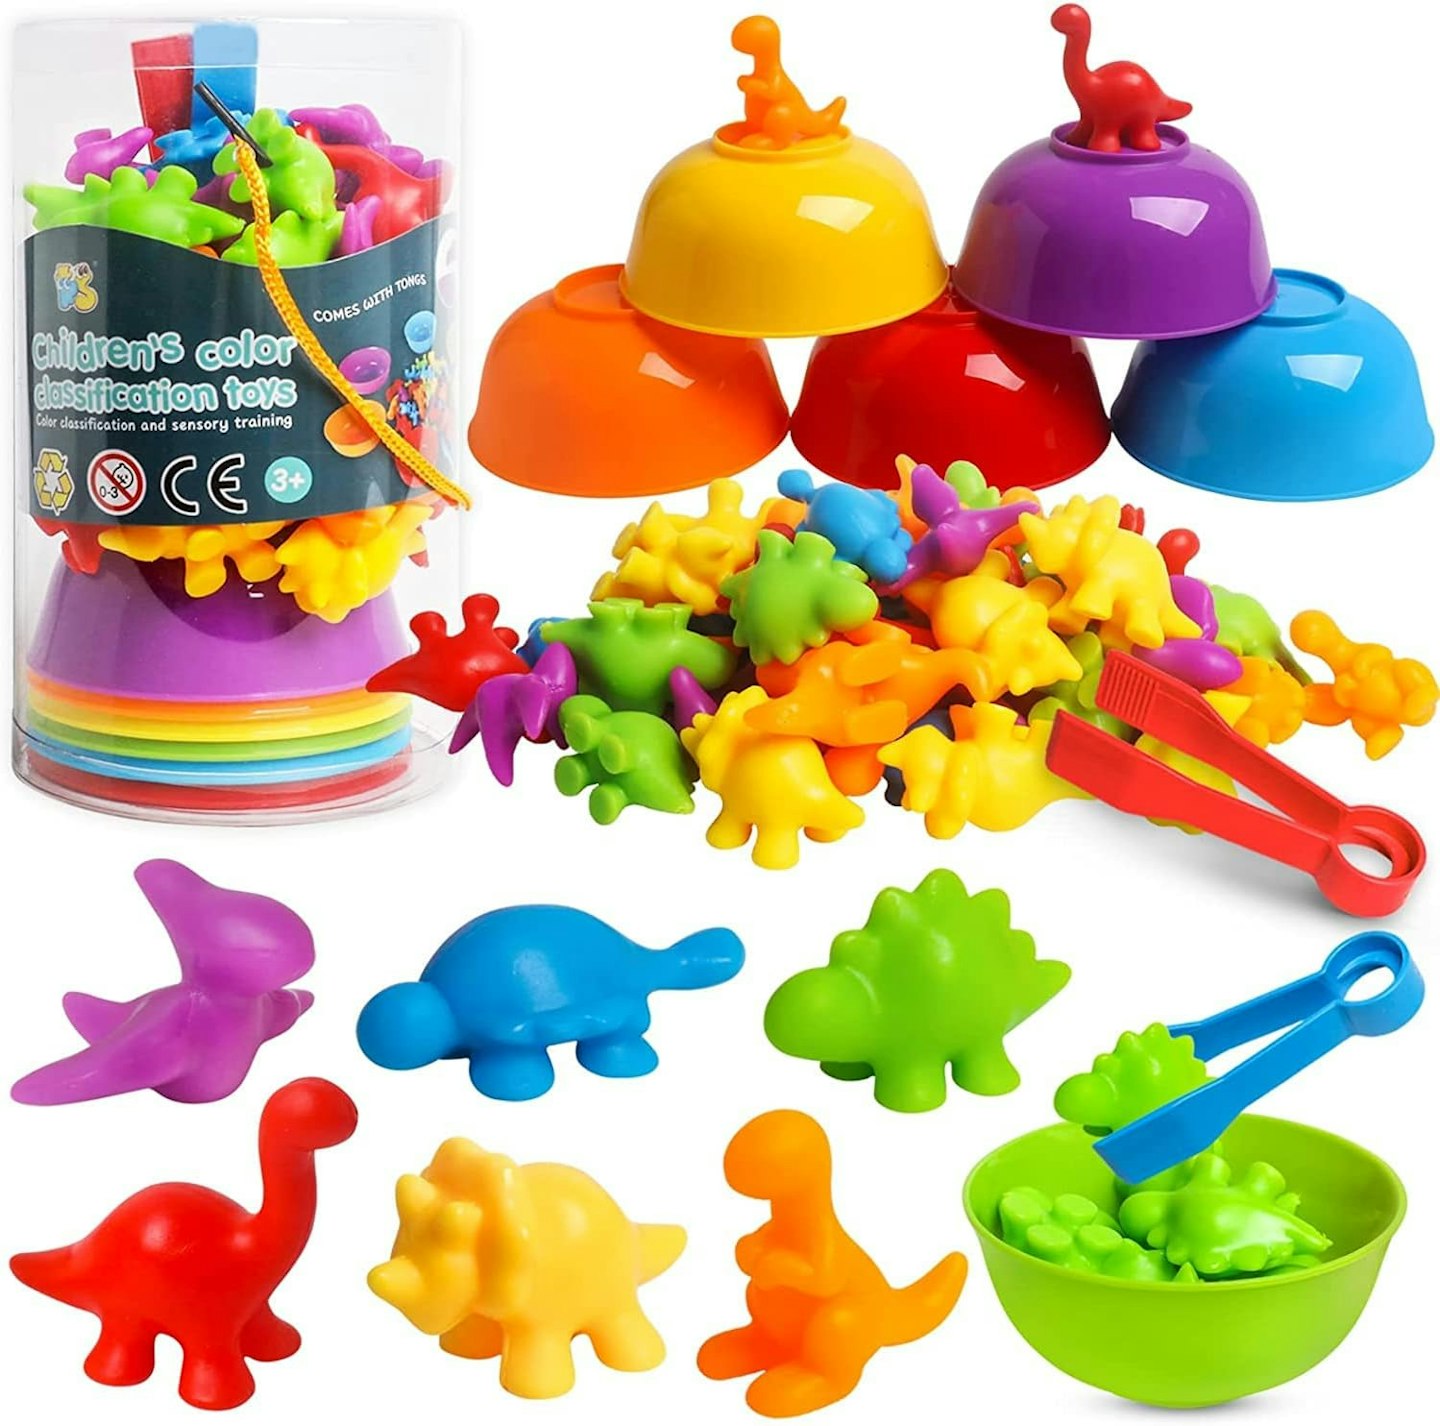 LEADSTAR Montessori Counting Toys